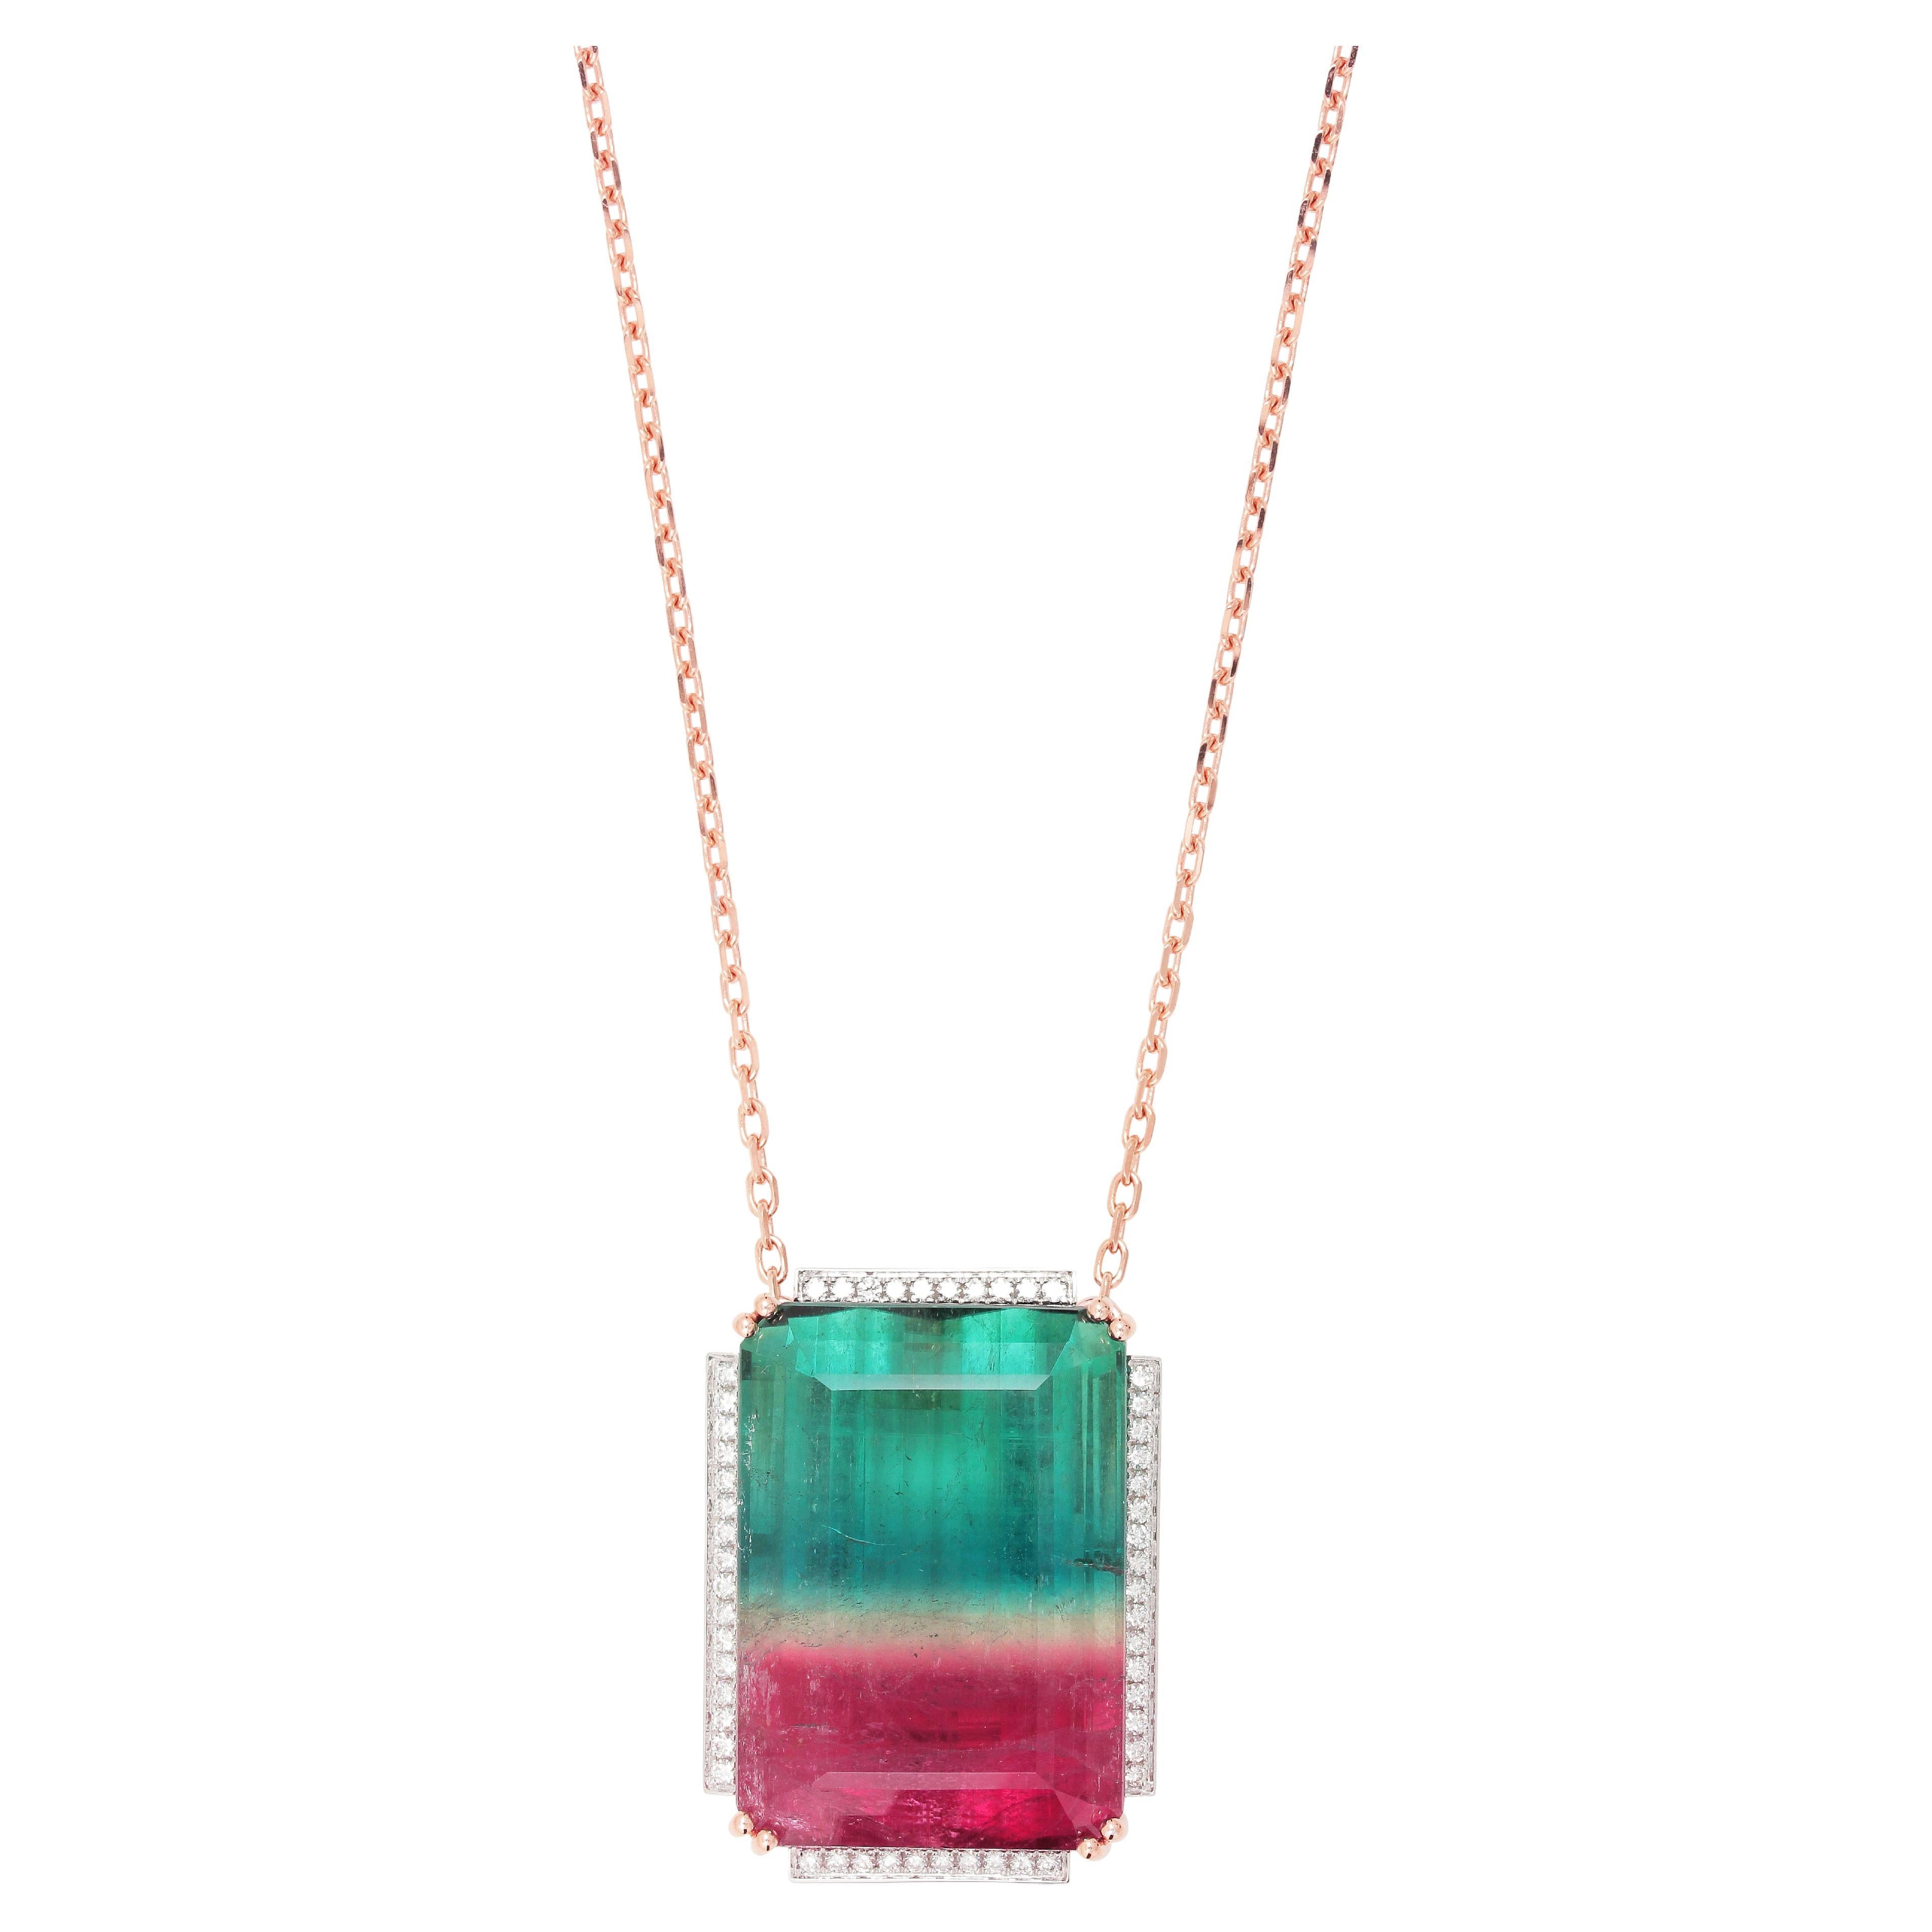 What is watermelon tourmaline used for?